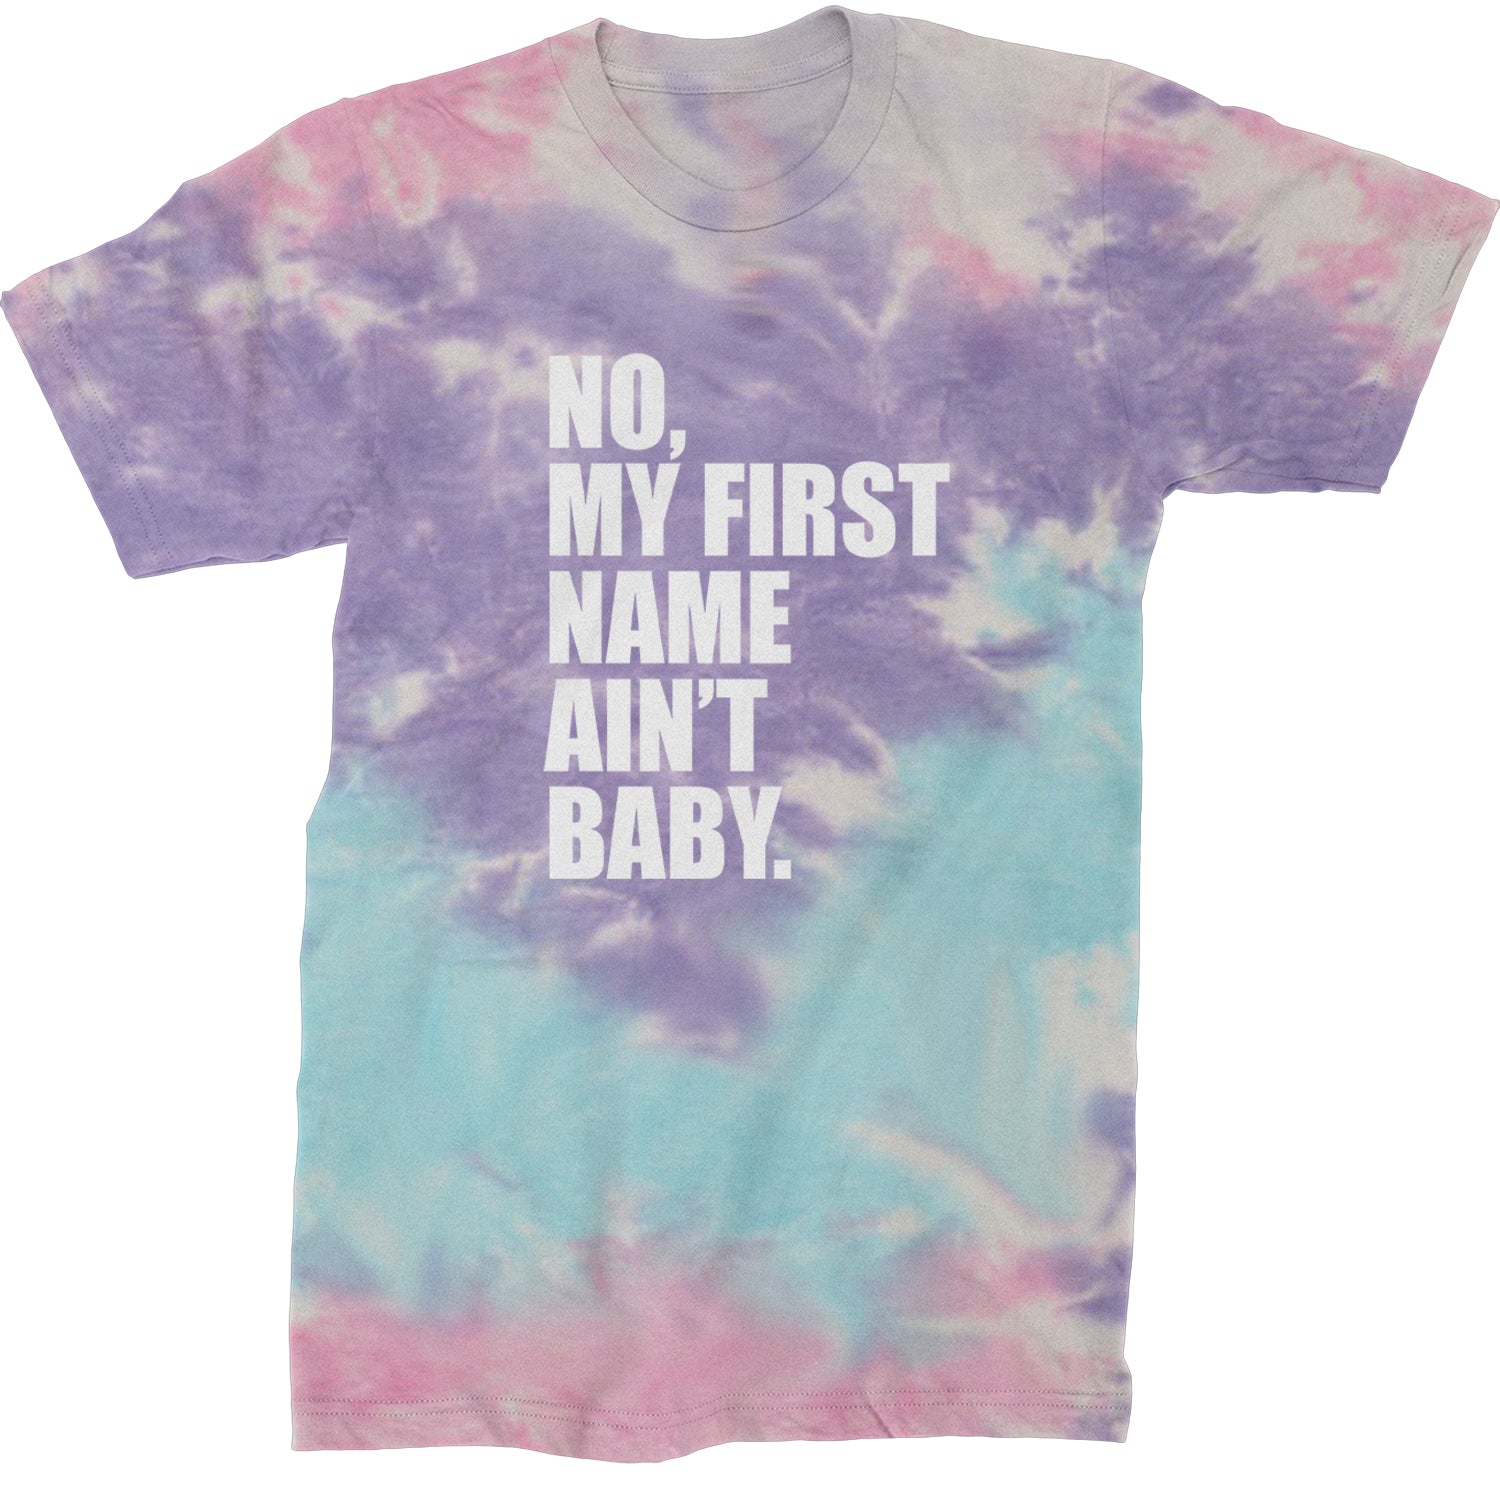 No My First Name Ain't Baby Together Again Mens T-shirt Tie-Dye Cotton Candy